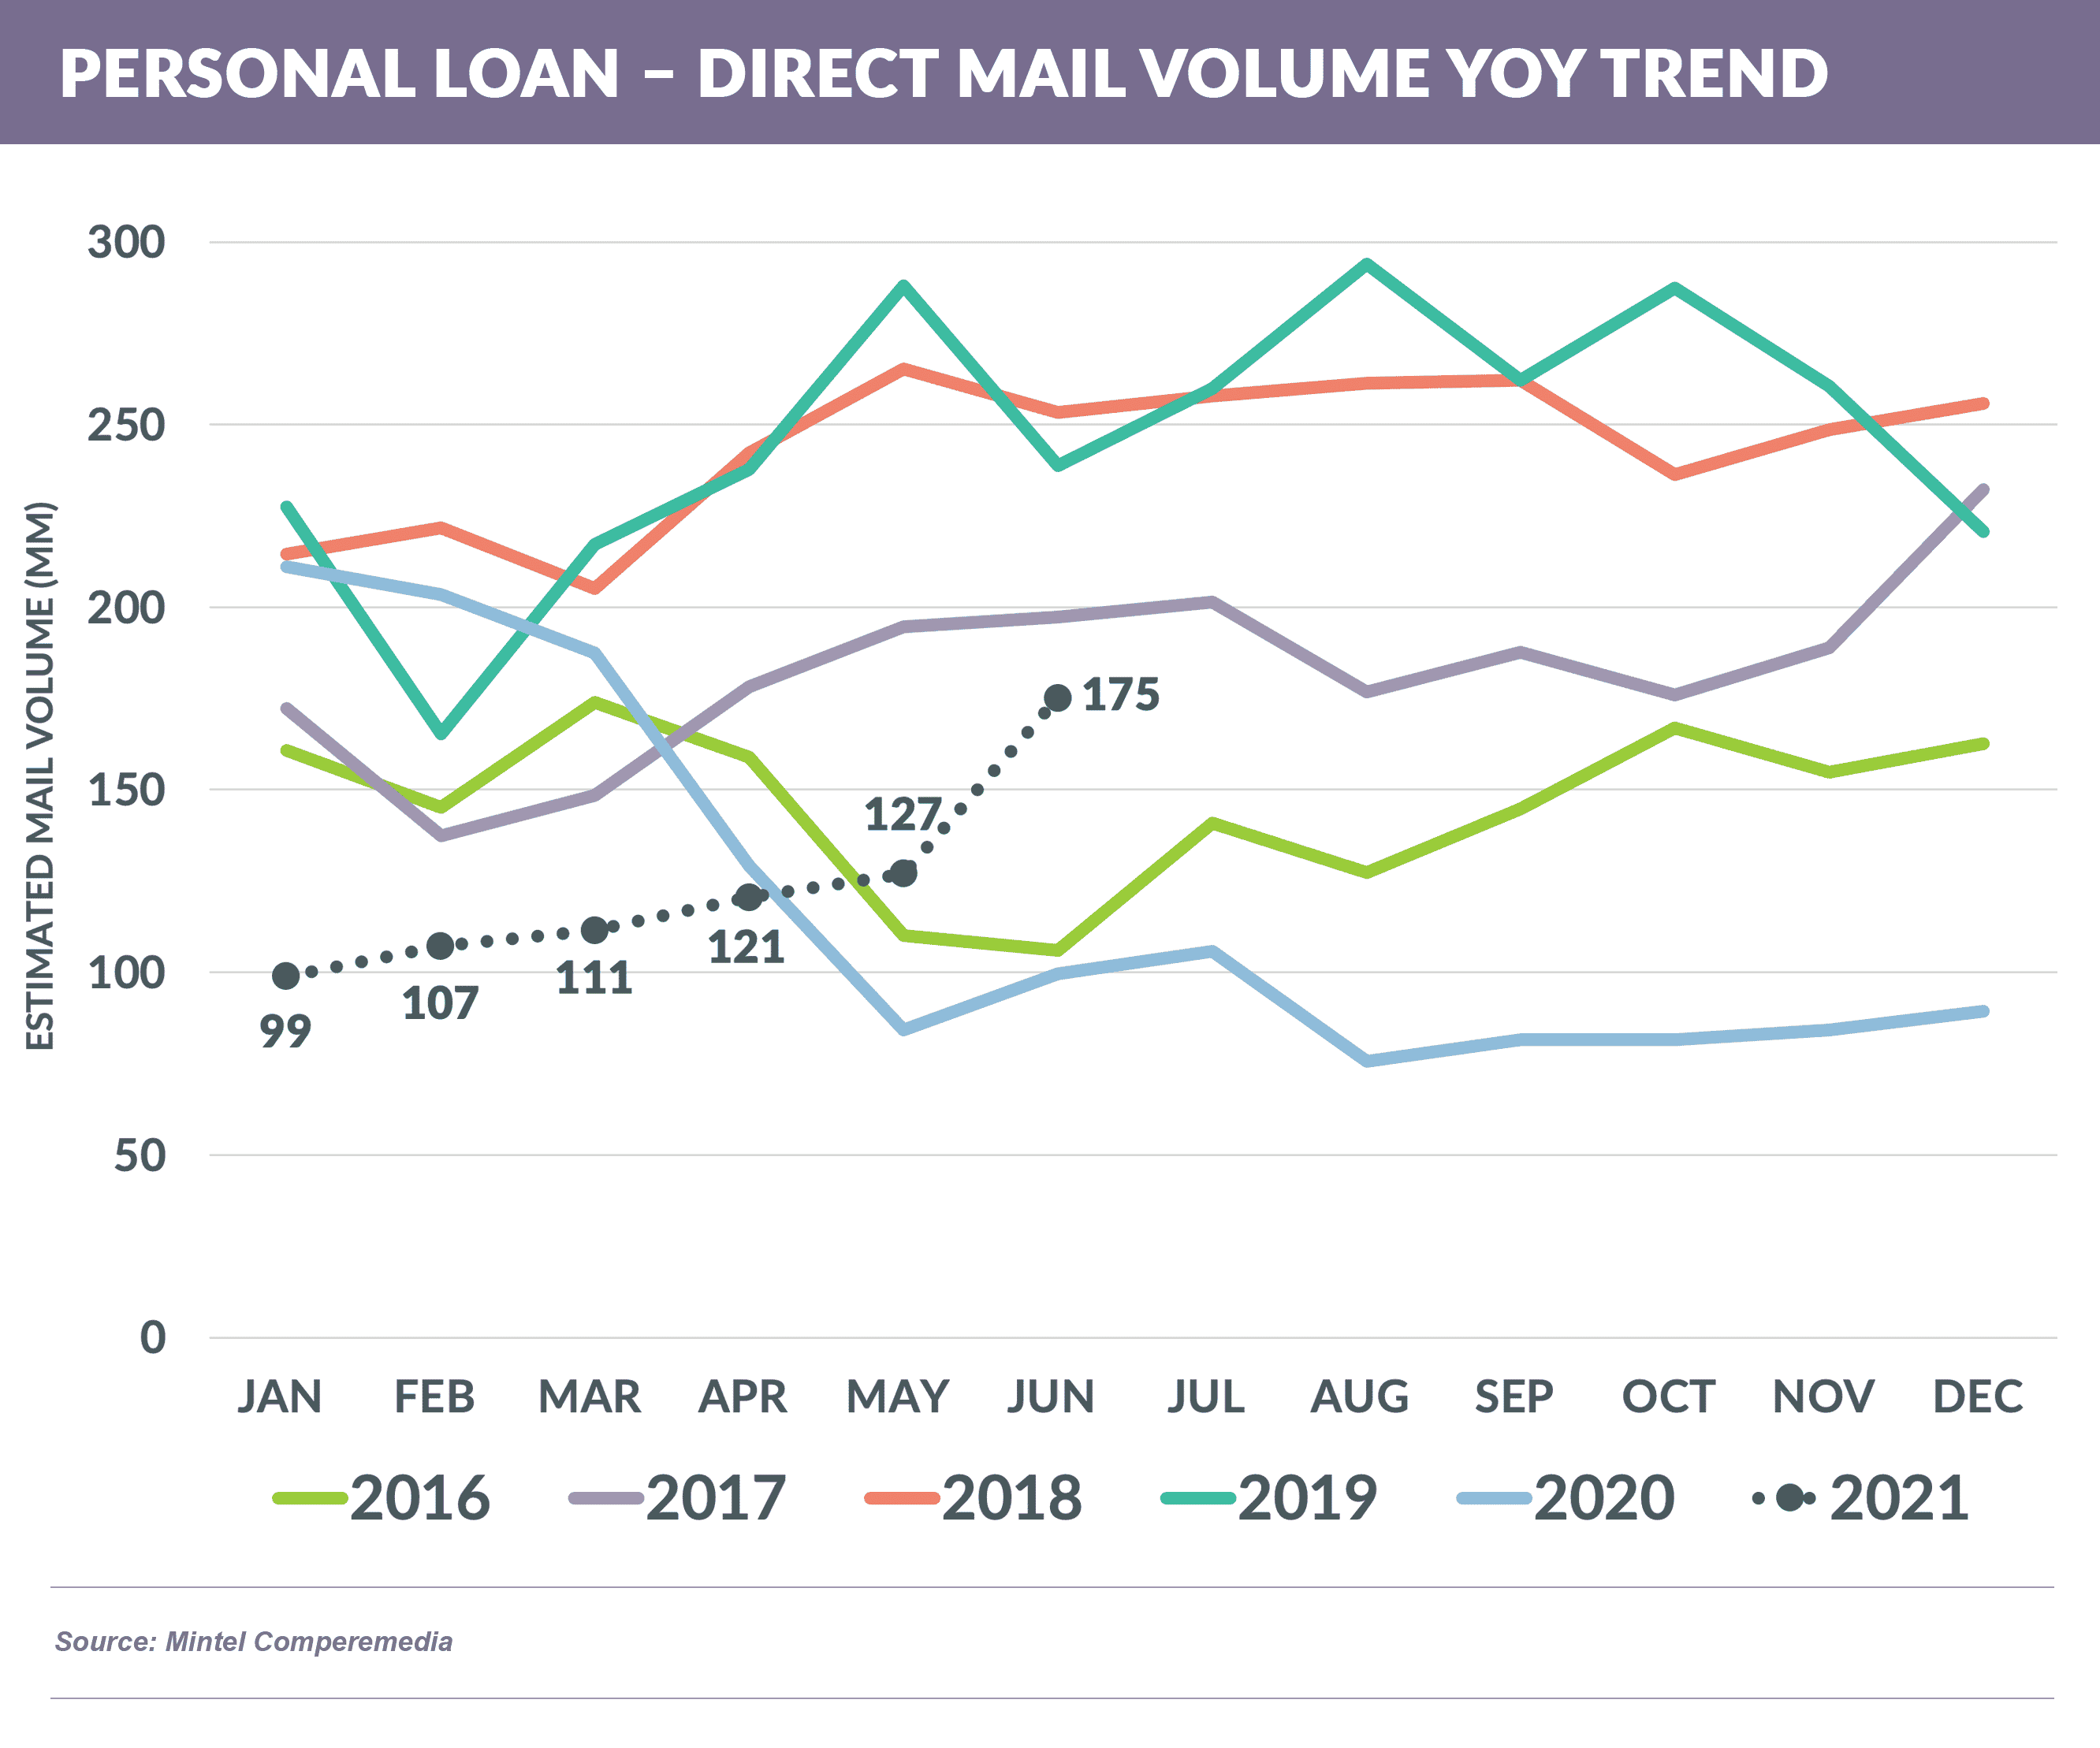 PERSONAL LOAN – DIRECT MAIL VOLUME YOY 20210807